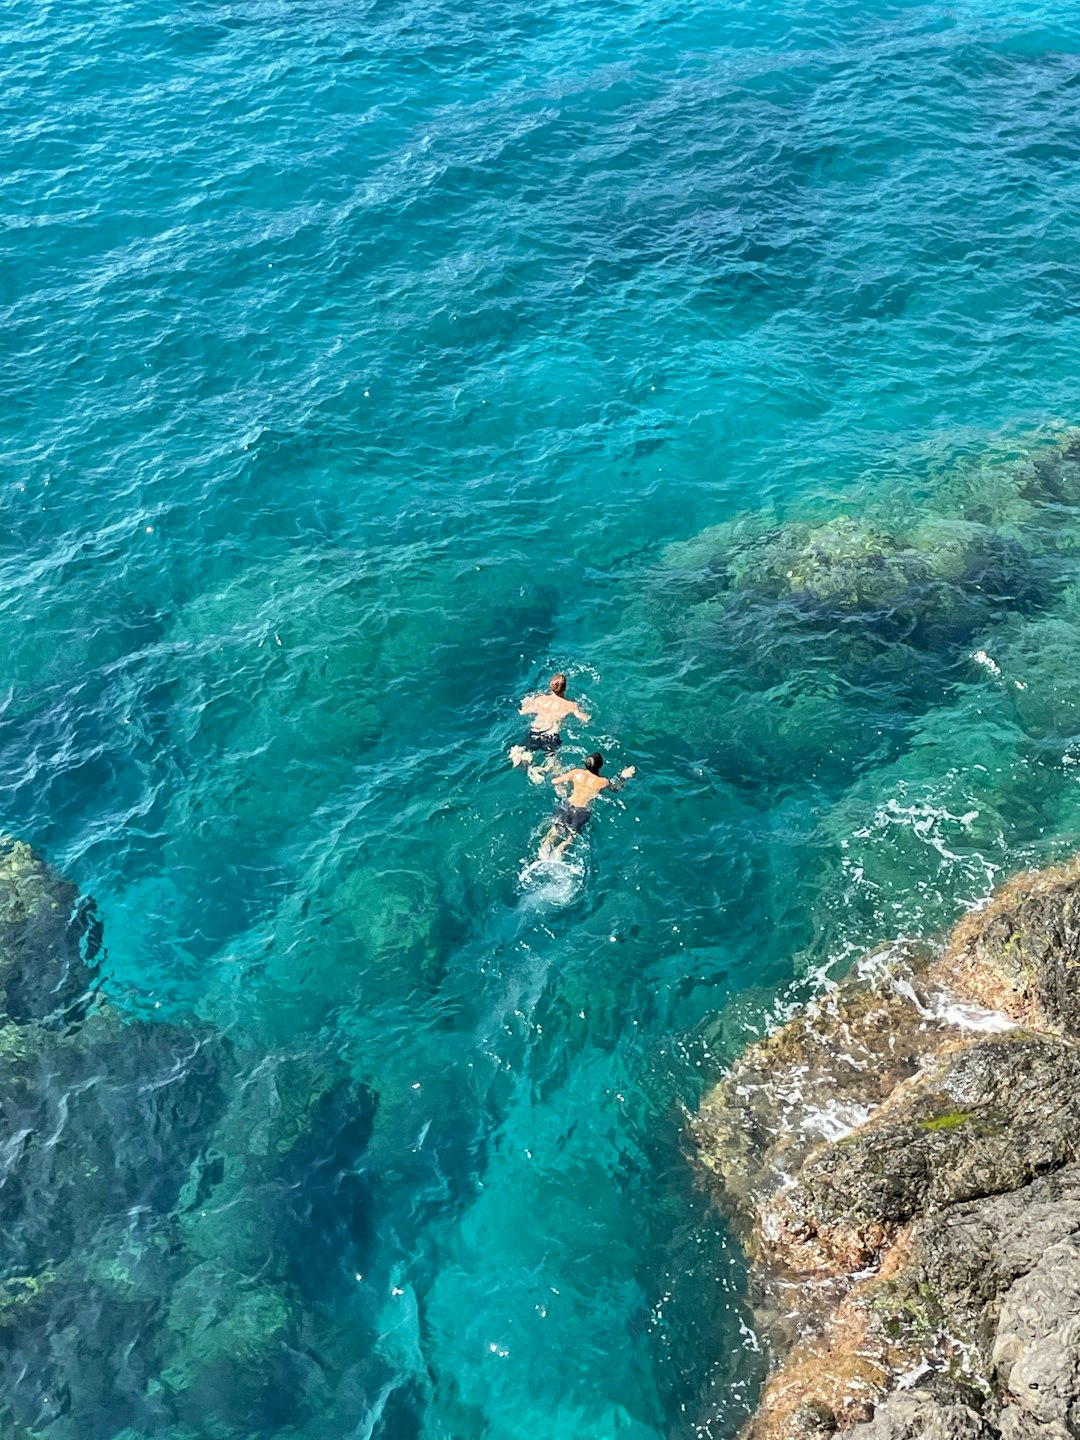 man in blue shorts swimming on blue sea during daytime